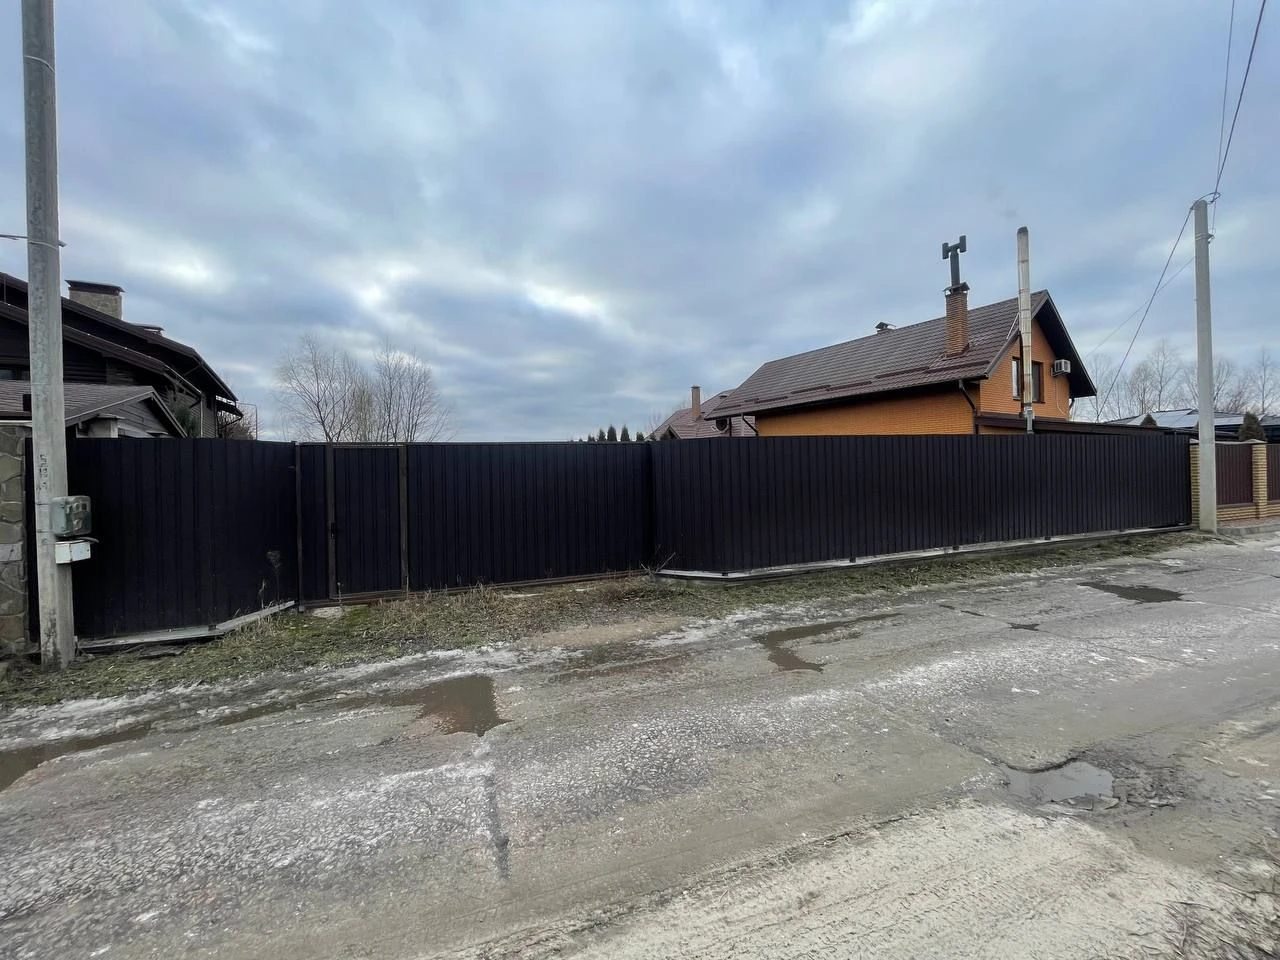 Land for sale for residential construction. Kyyliv. 